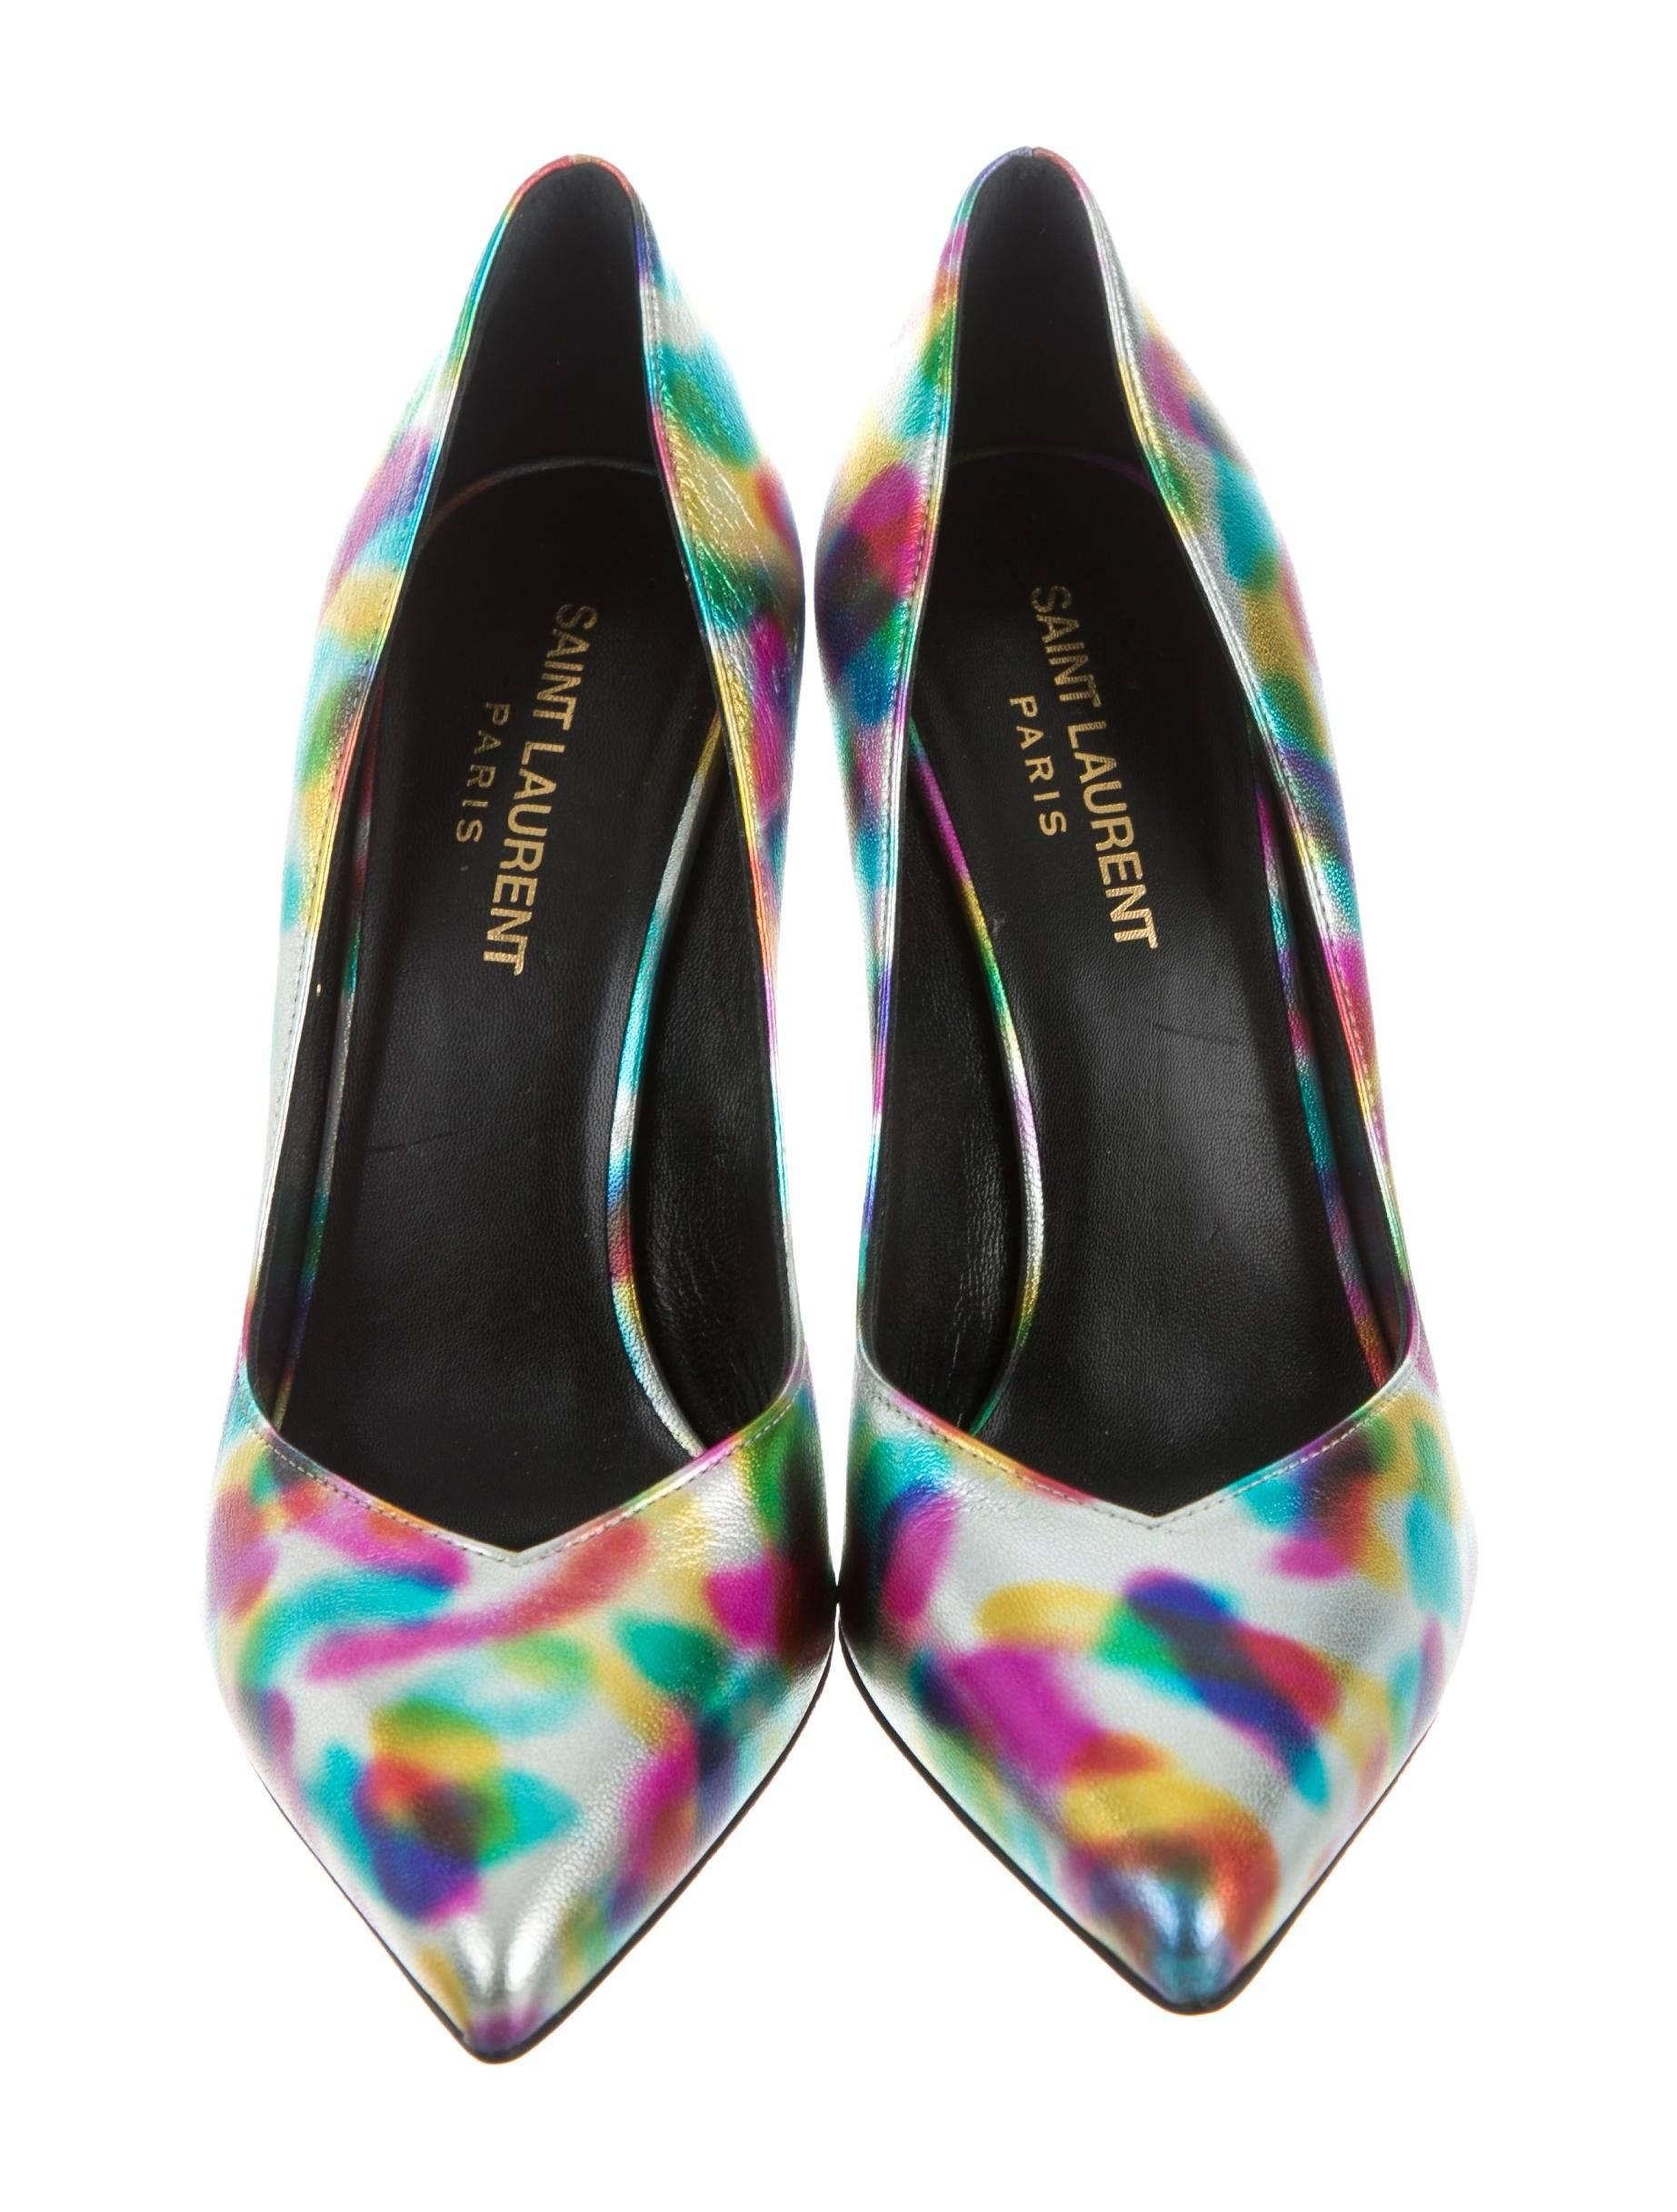 CURATOR'S NOTES

Saint Laurent New Rainbow Leather Evening Heels Pumps Shoes in Box  

Size IT 36.5
Leather
Slip on 
Made in Italy
Heel height 4"
Includes original Saint Laurent box 